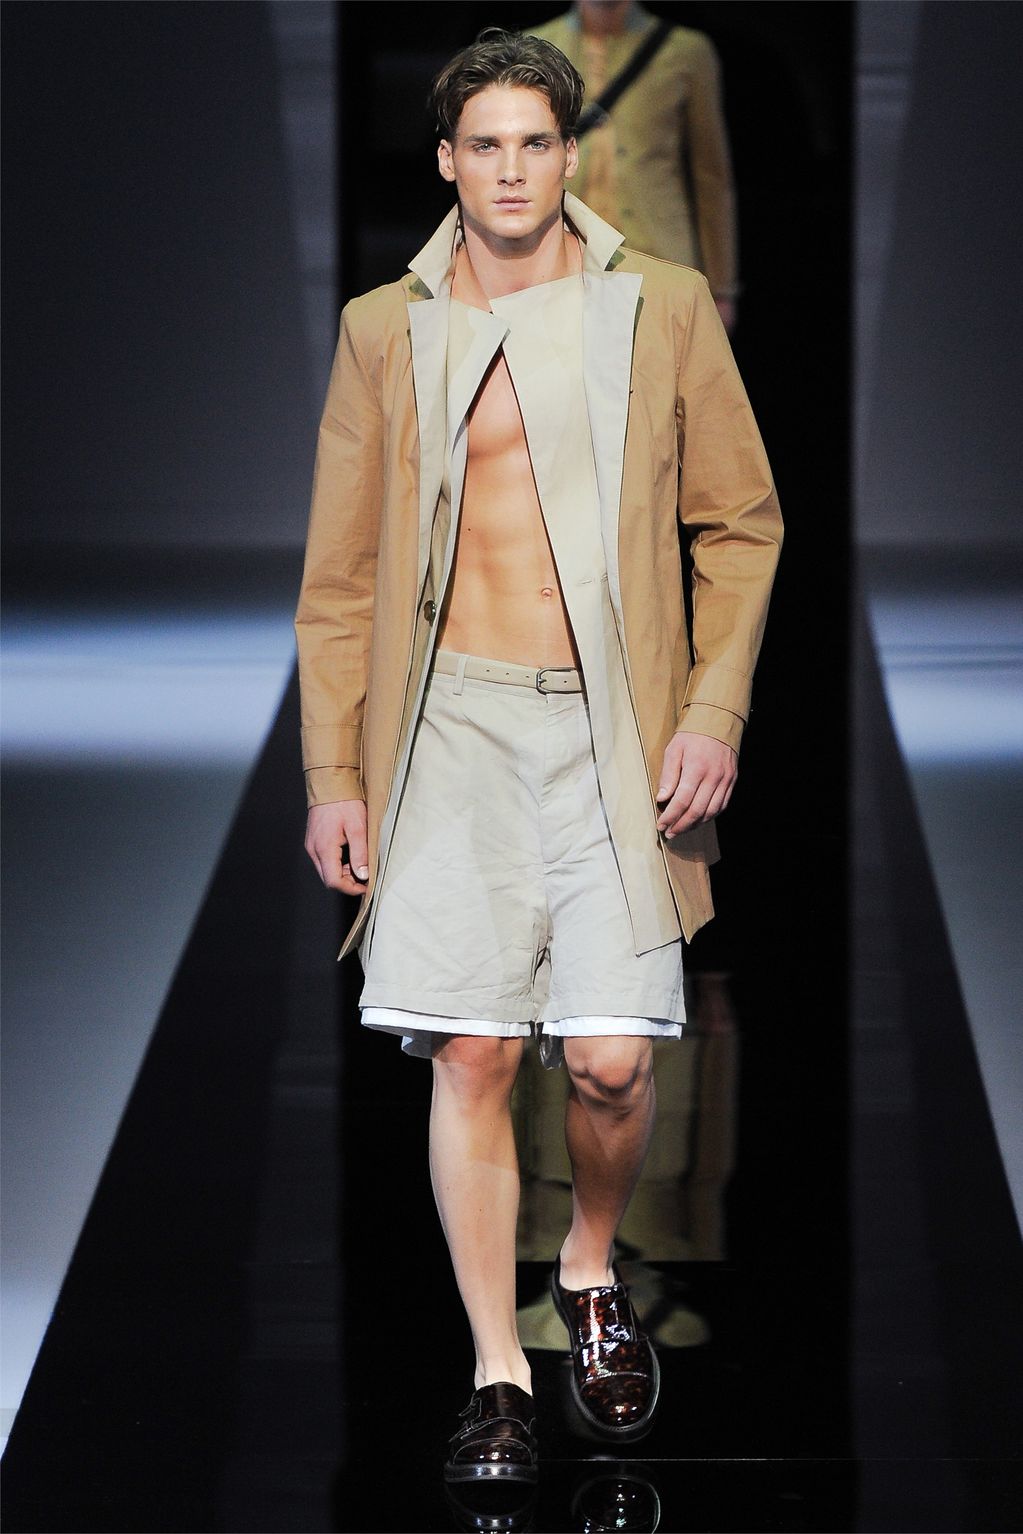 ticket to you: MEN'S WEEK - Milan 2013 - And yes, I mean MEN